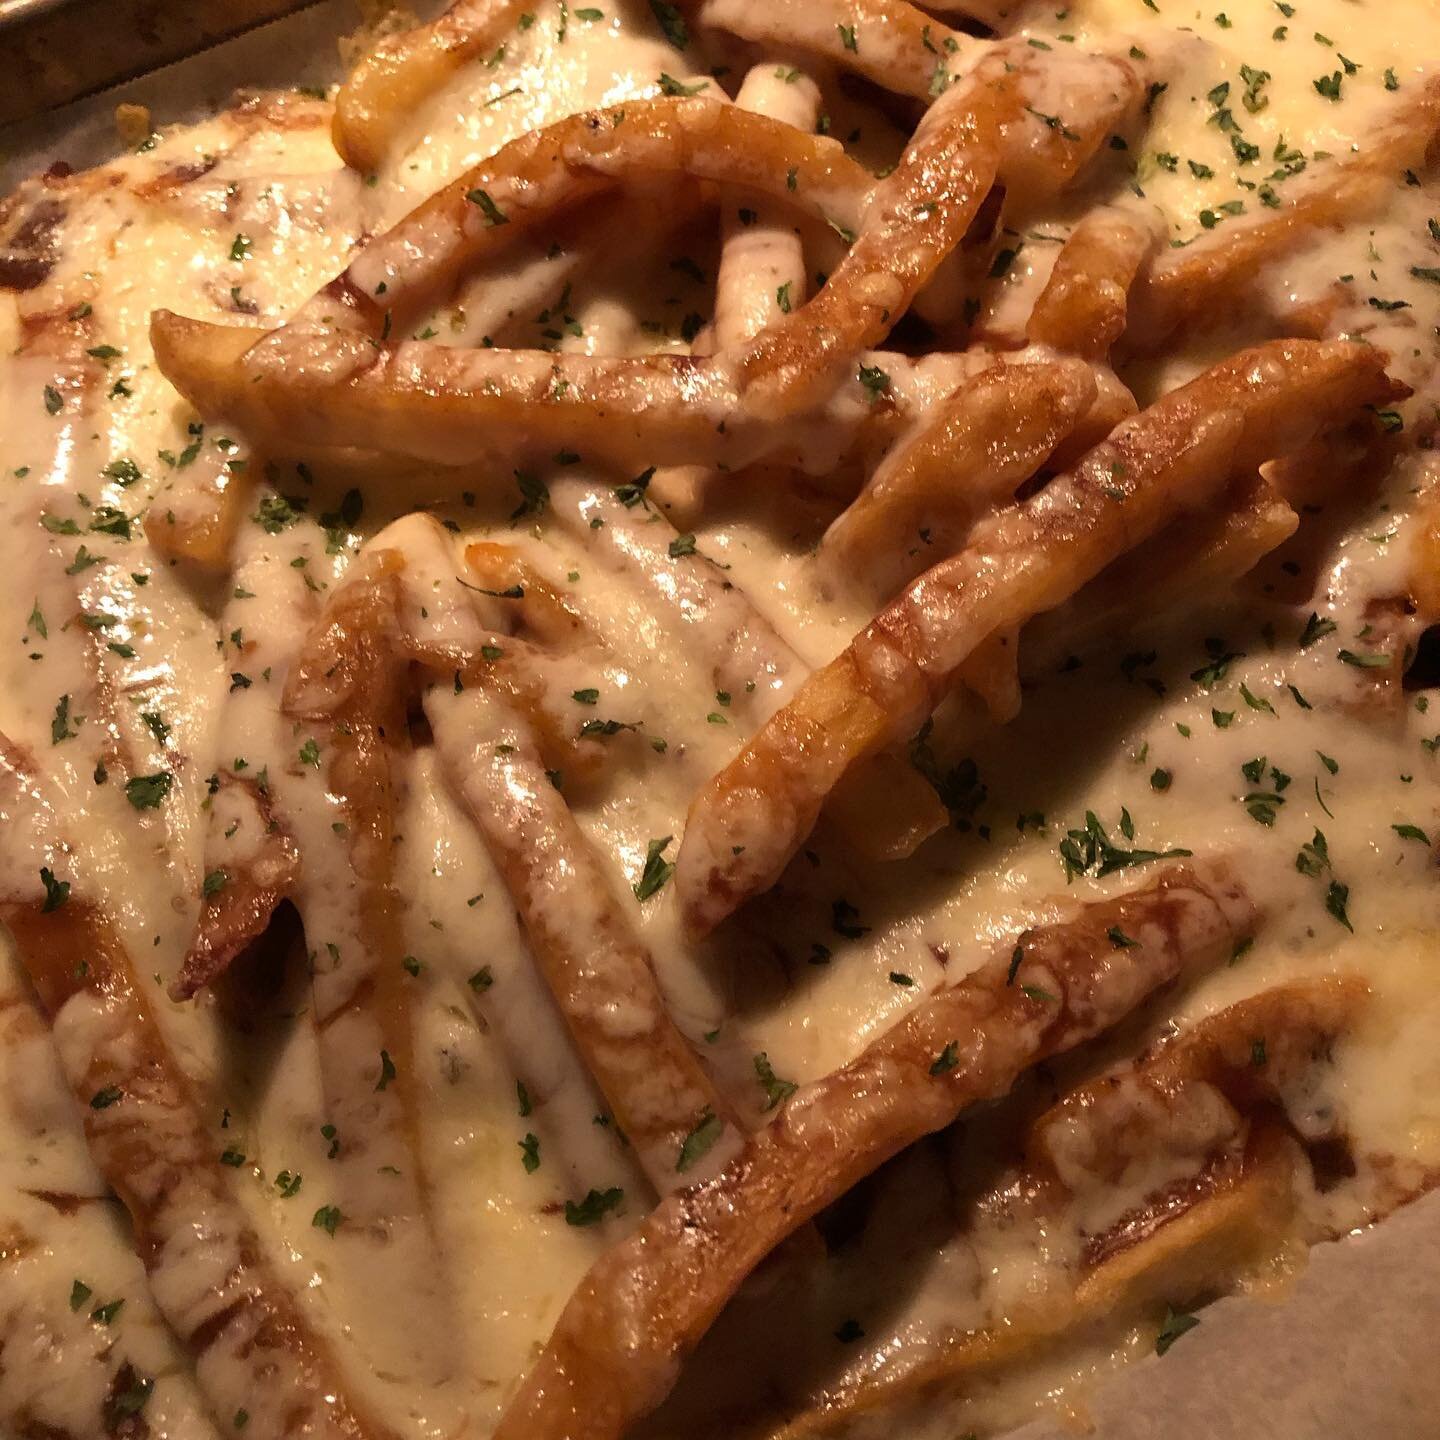 About a year ago, I had a hankering&rsquo; for an old-time, Jersey diner, after-hours favorite; gravy fries w/ cheese (aka Disco Fries). As my wife wandered into the kitchen to witness me creating this epic concoction, she exclaimed &ldquo;What the f